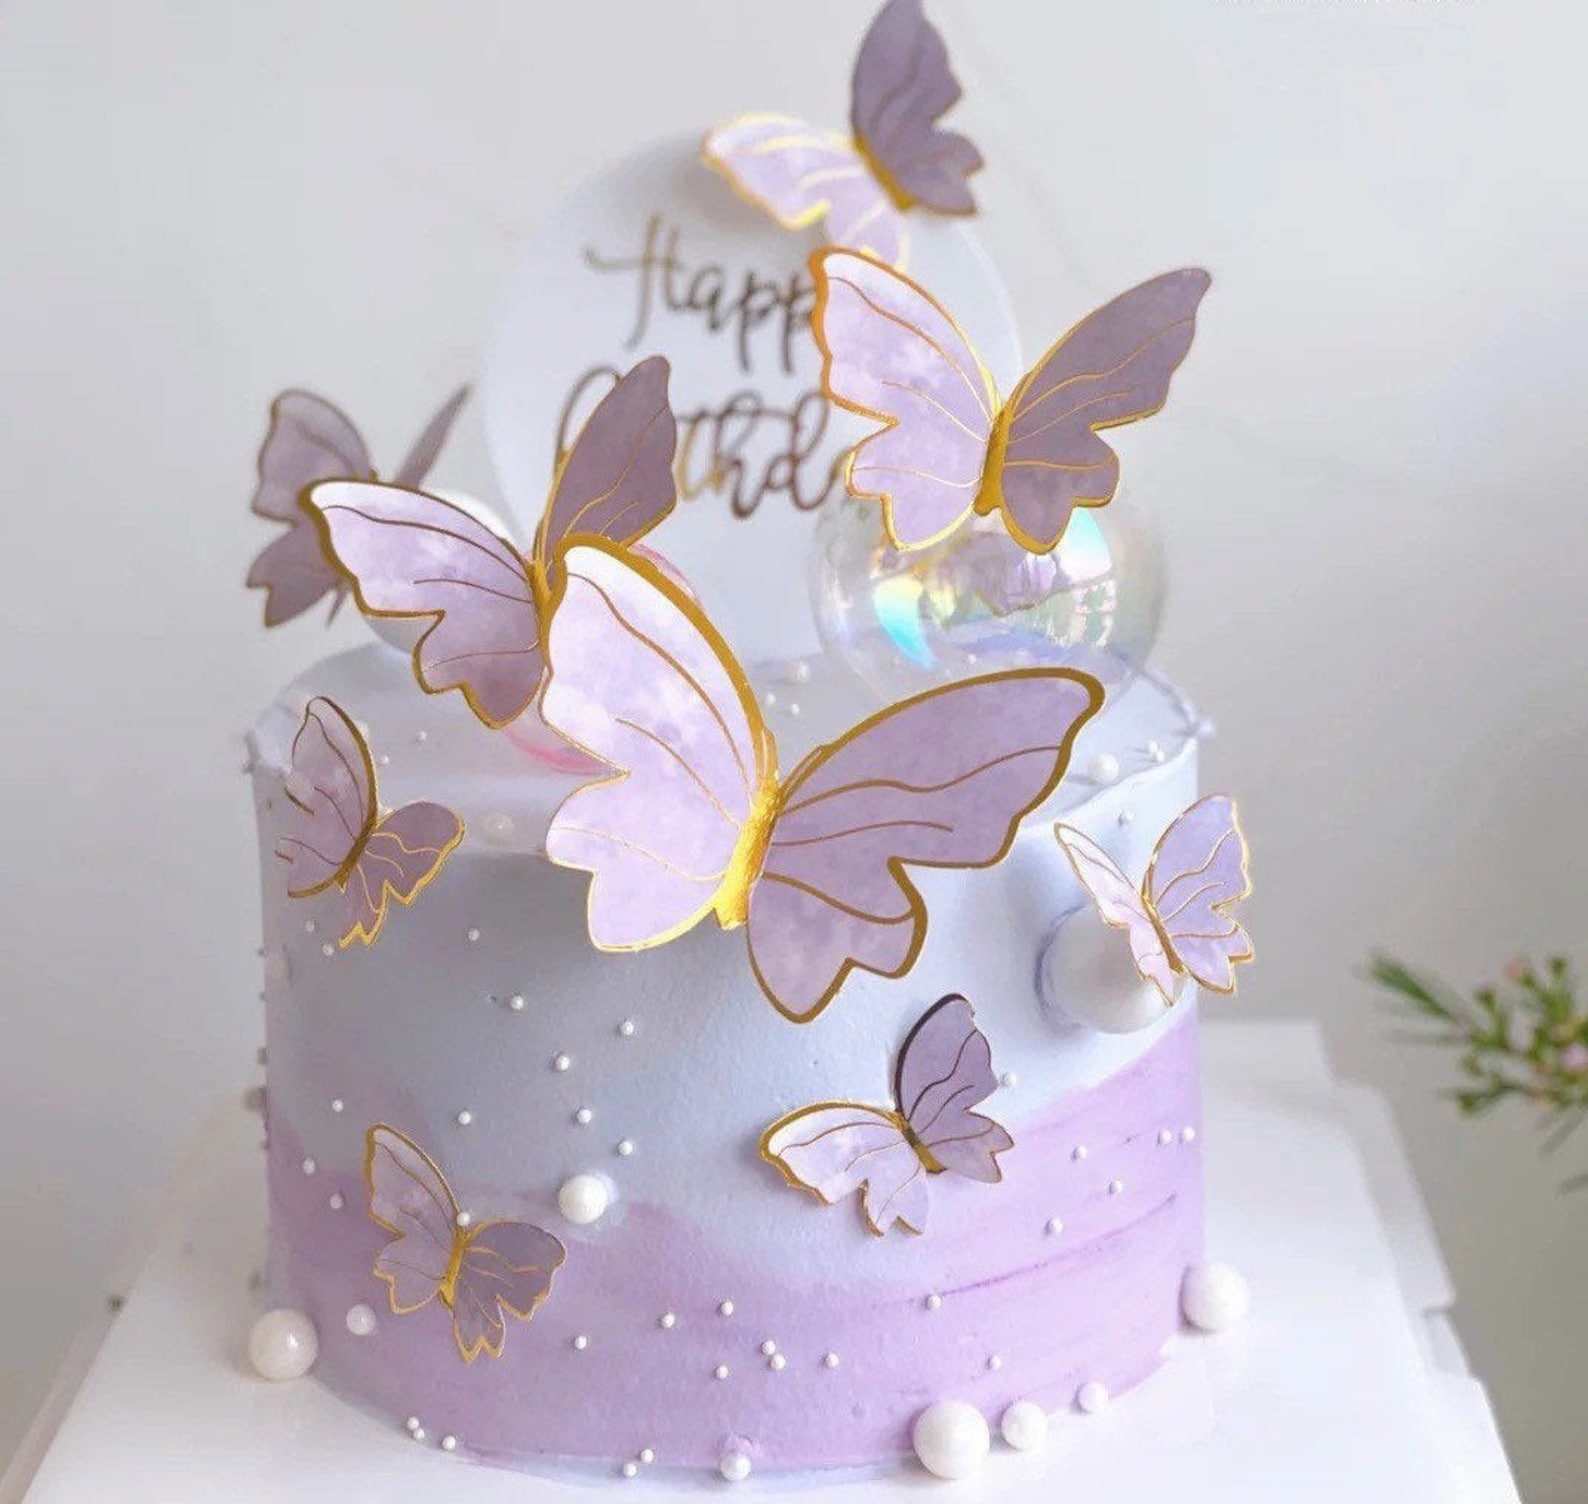 Set of 5 or 10 Butterfly Cake Topper Cake Decorating Cake - Etsy